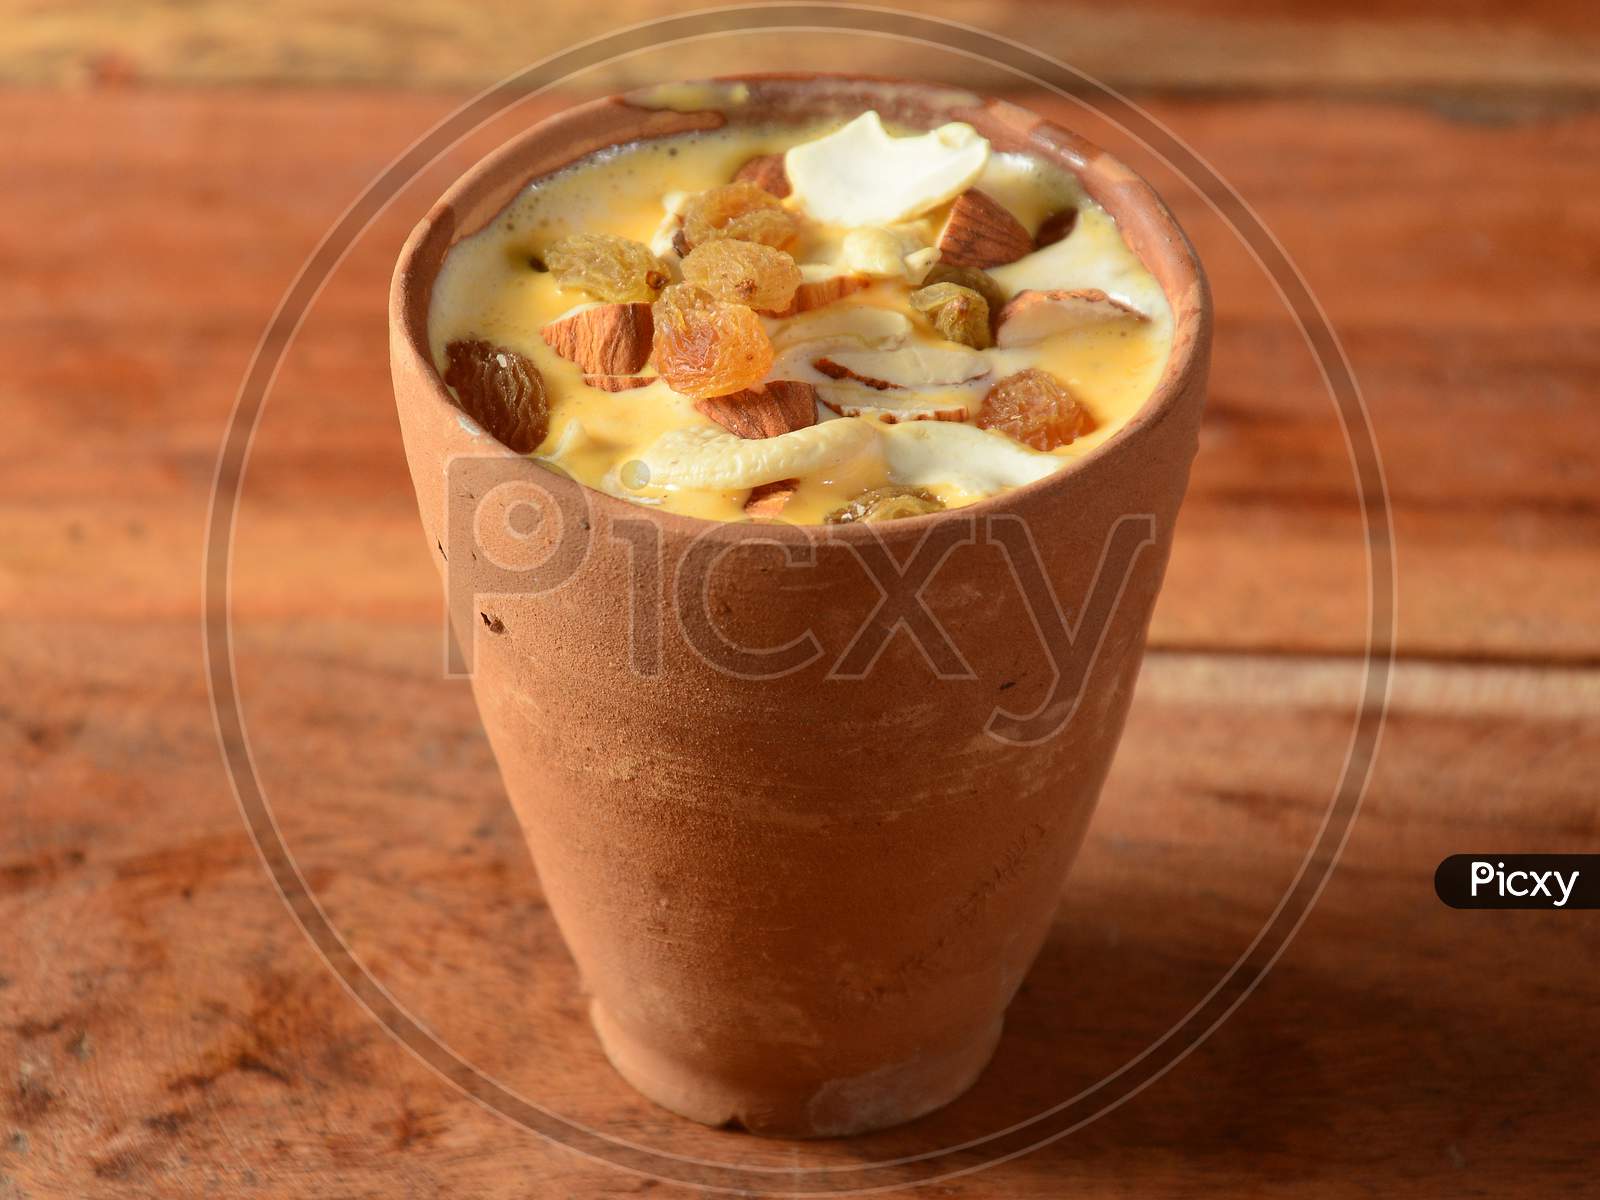 Matka Malai Kulfi Or Clay Pot Malai Kulfi Is A Indian Traditional Ice Cream, Rich In Taste And Creamier,The Malai Flavoured Ice Cream Set To Be Frozen In Clay Pot, That Is Called As Matka Malai Kulfi